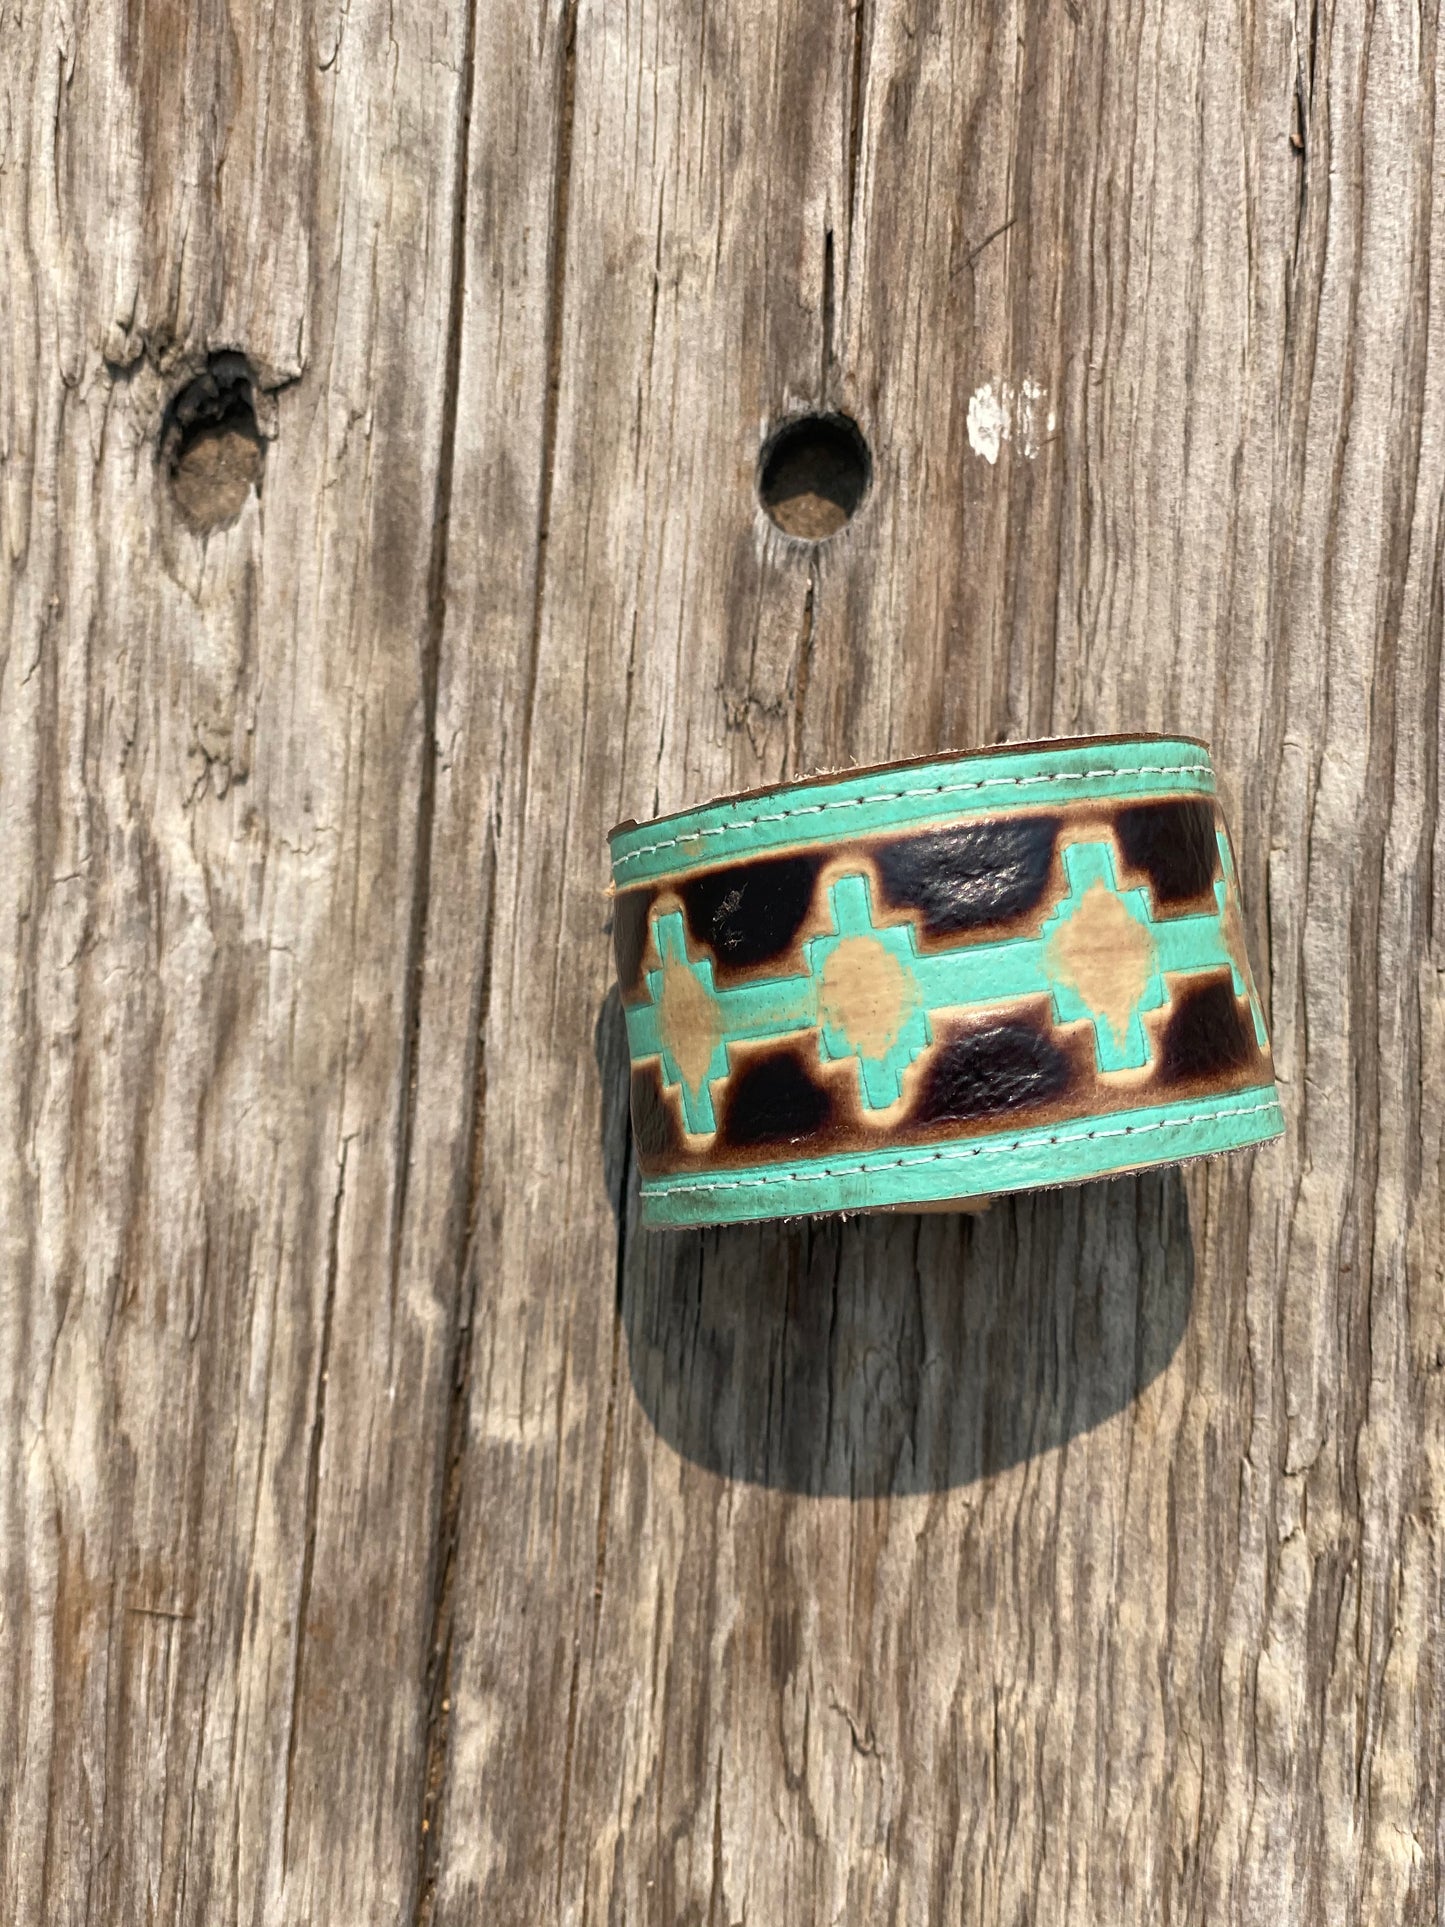 Turquoise/Brown Leather Cuff Bracelet